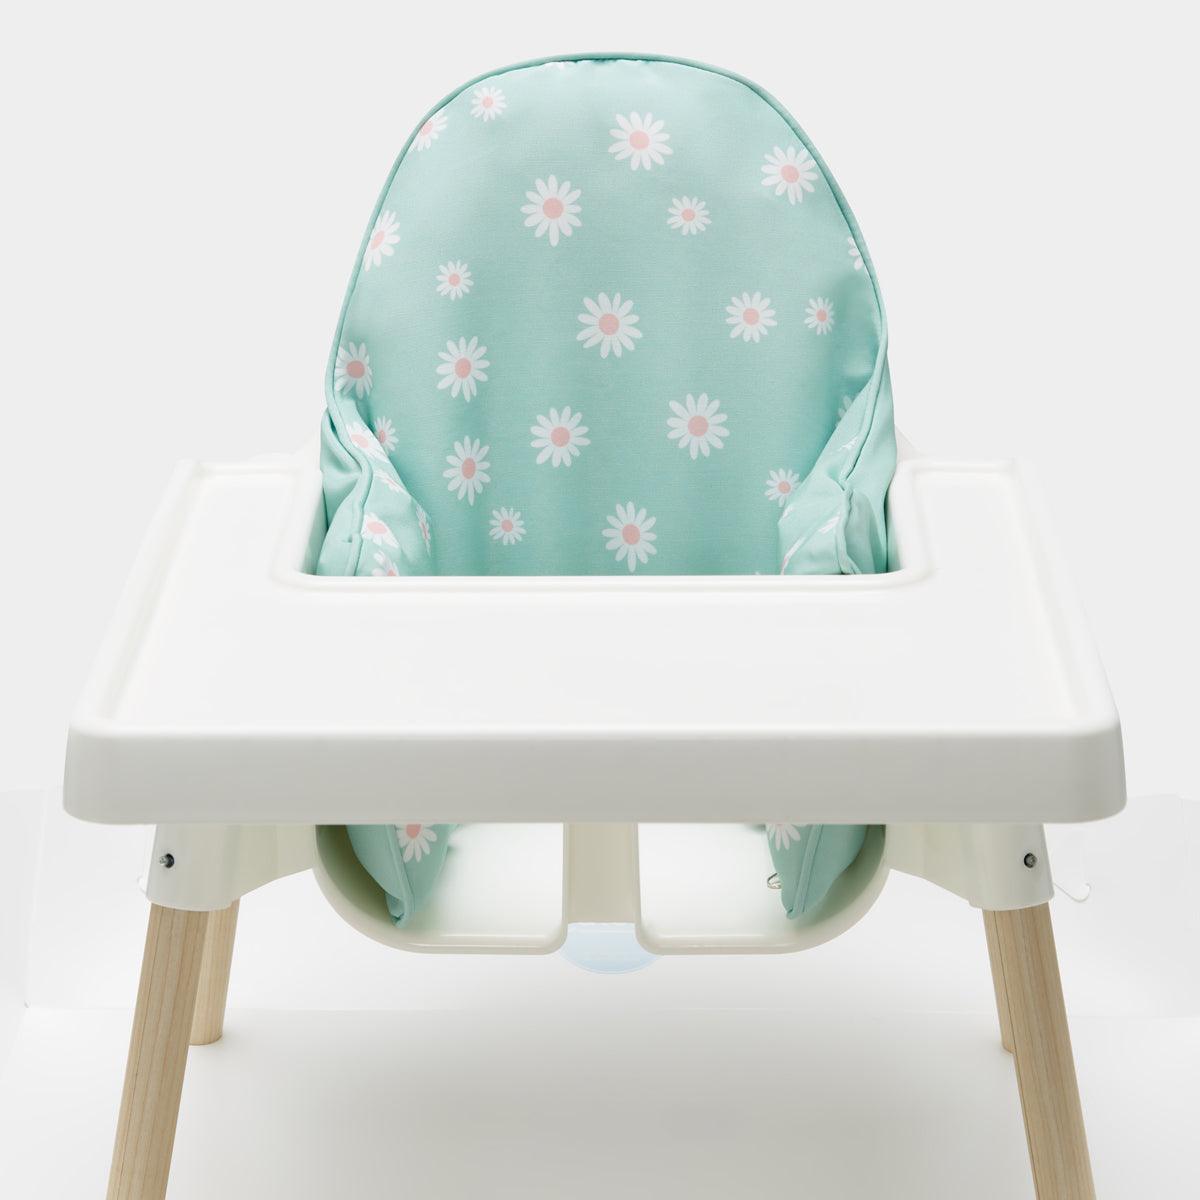 Cushion cover for IKEA Antilop & similar high chairs - Catchy